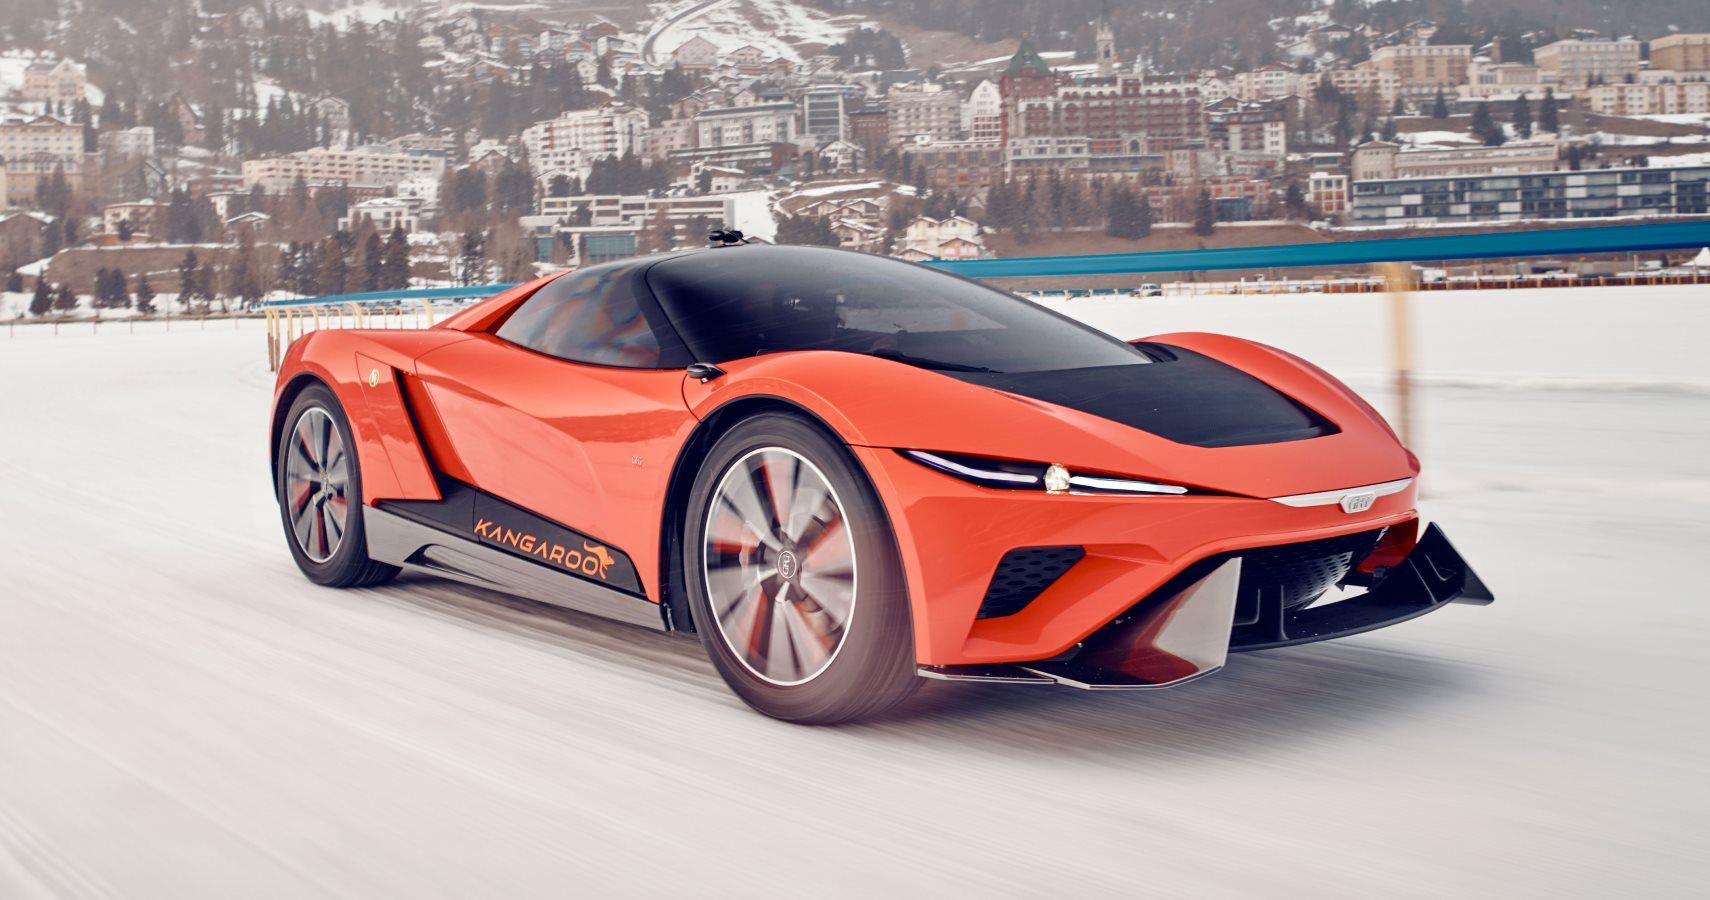 GFG Style Kangaroo Concept Is The World's First 'Hyper SUV'